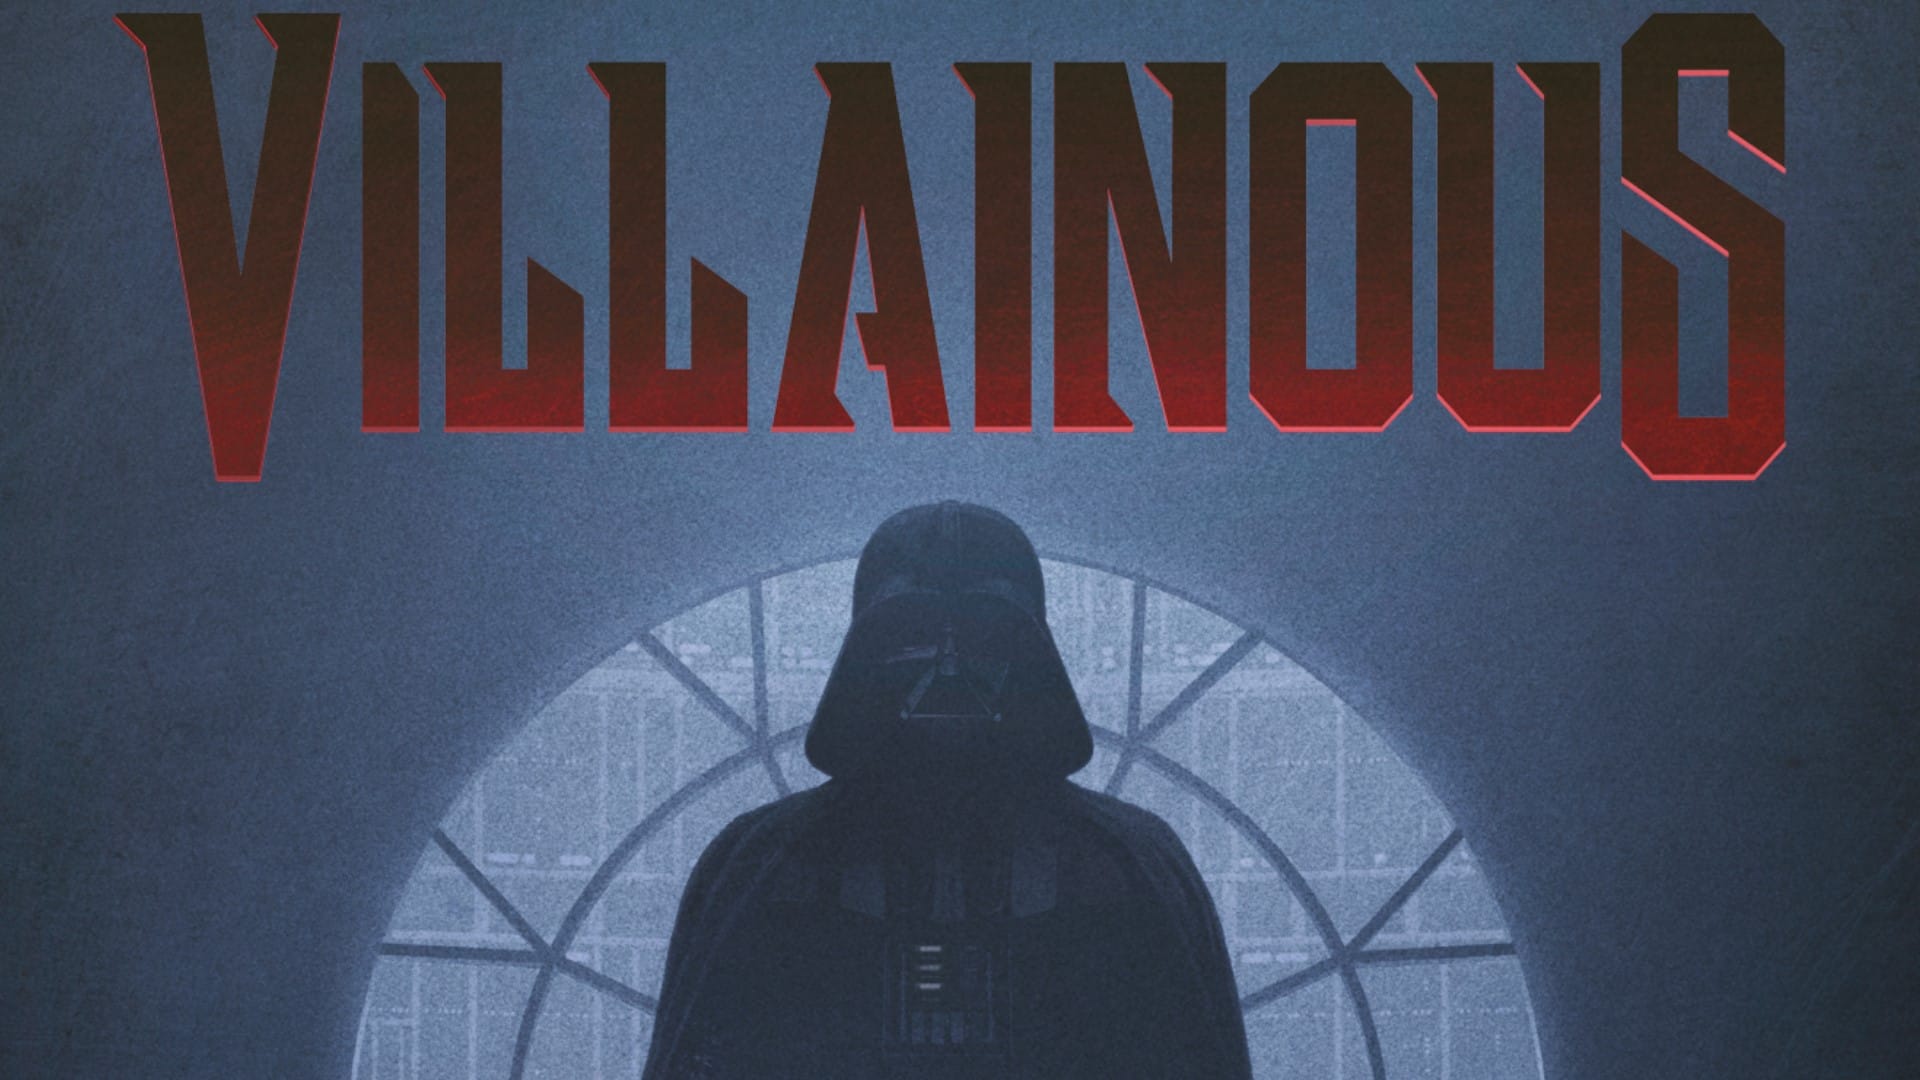 Artwork of Darth Vader in a dark room, the title of Villainous above him in red text